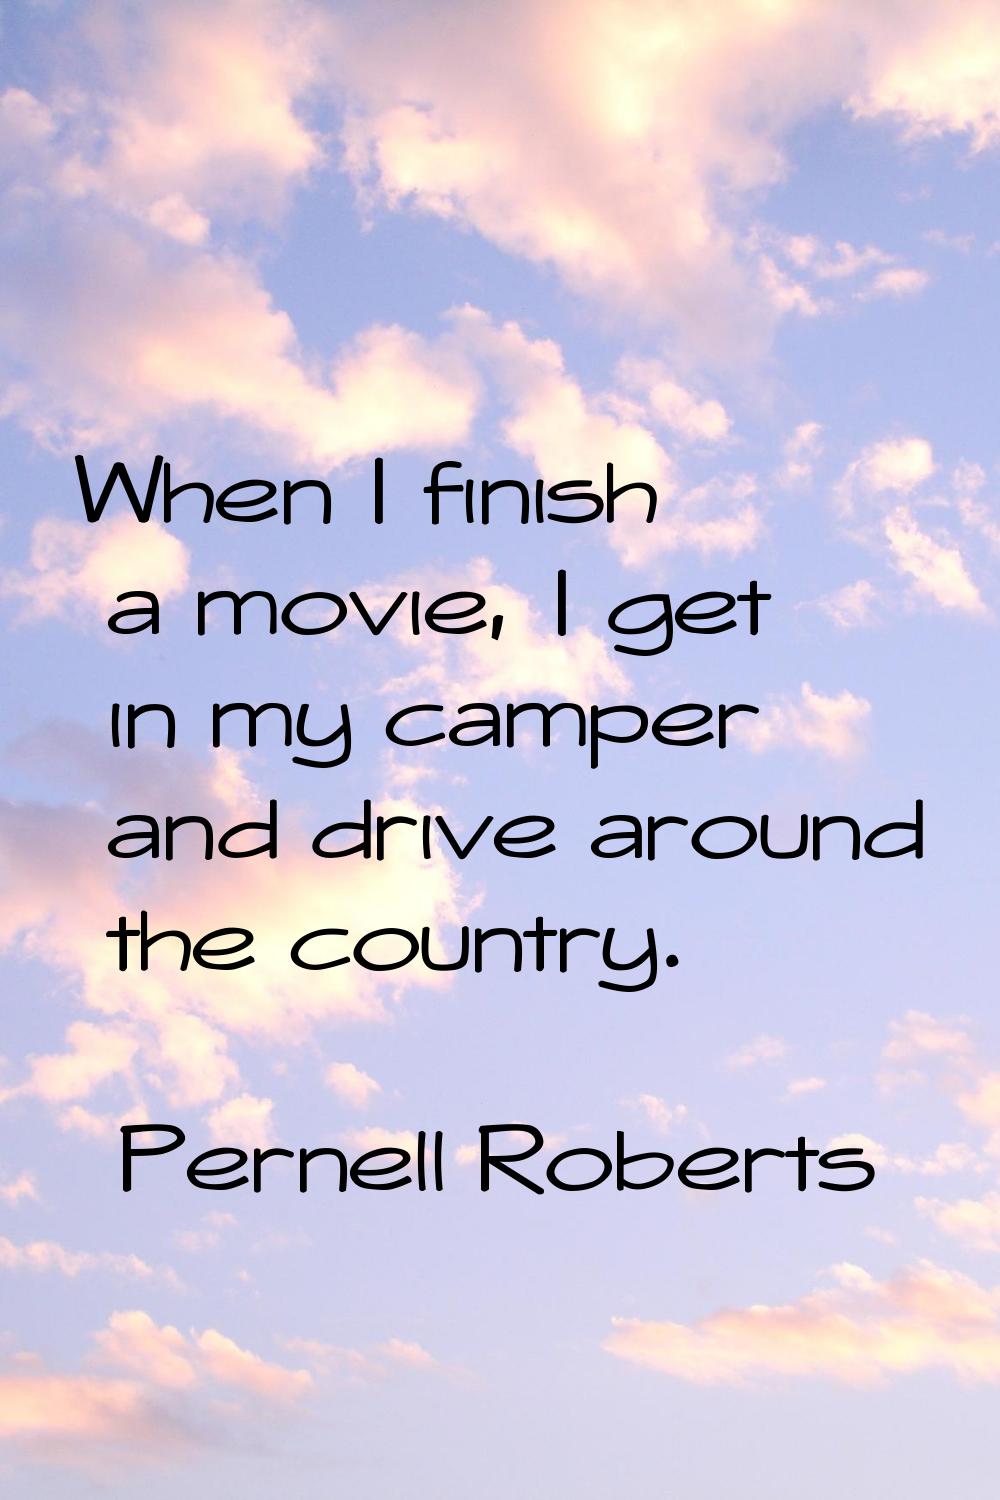 When I finish a movie, I get in my camper and drive around the country.